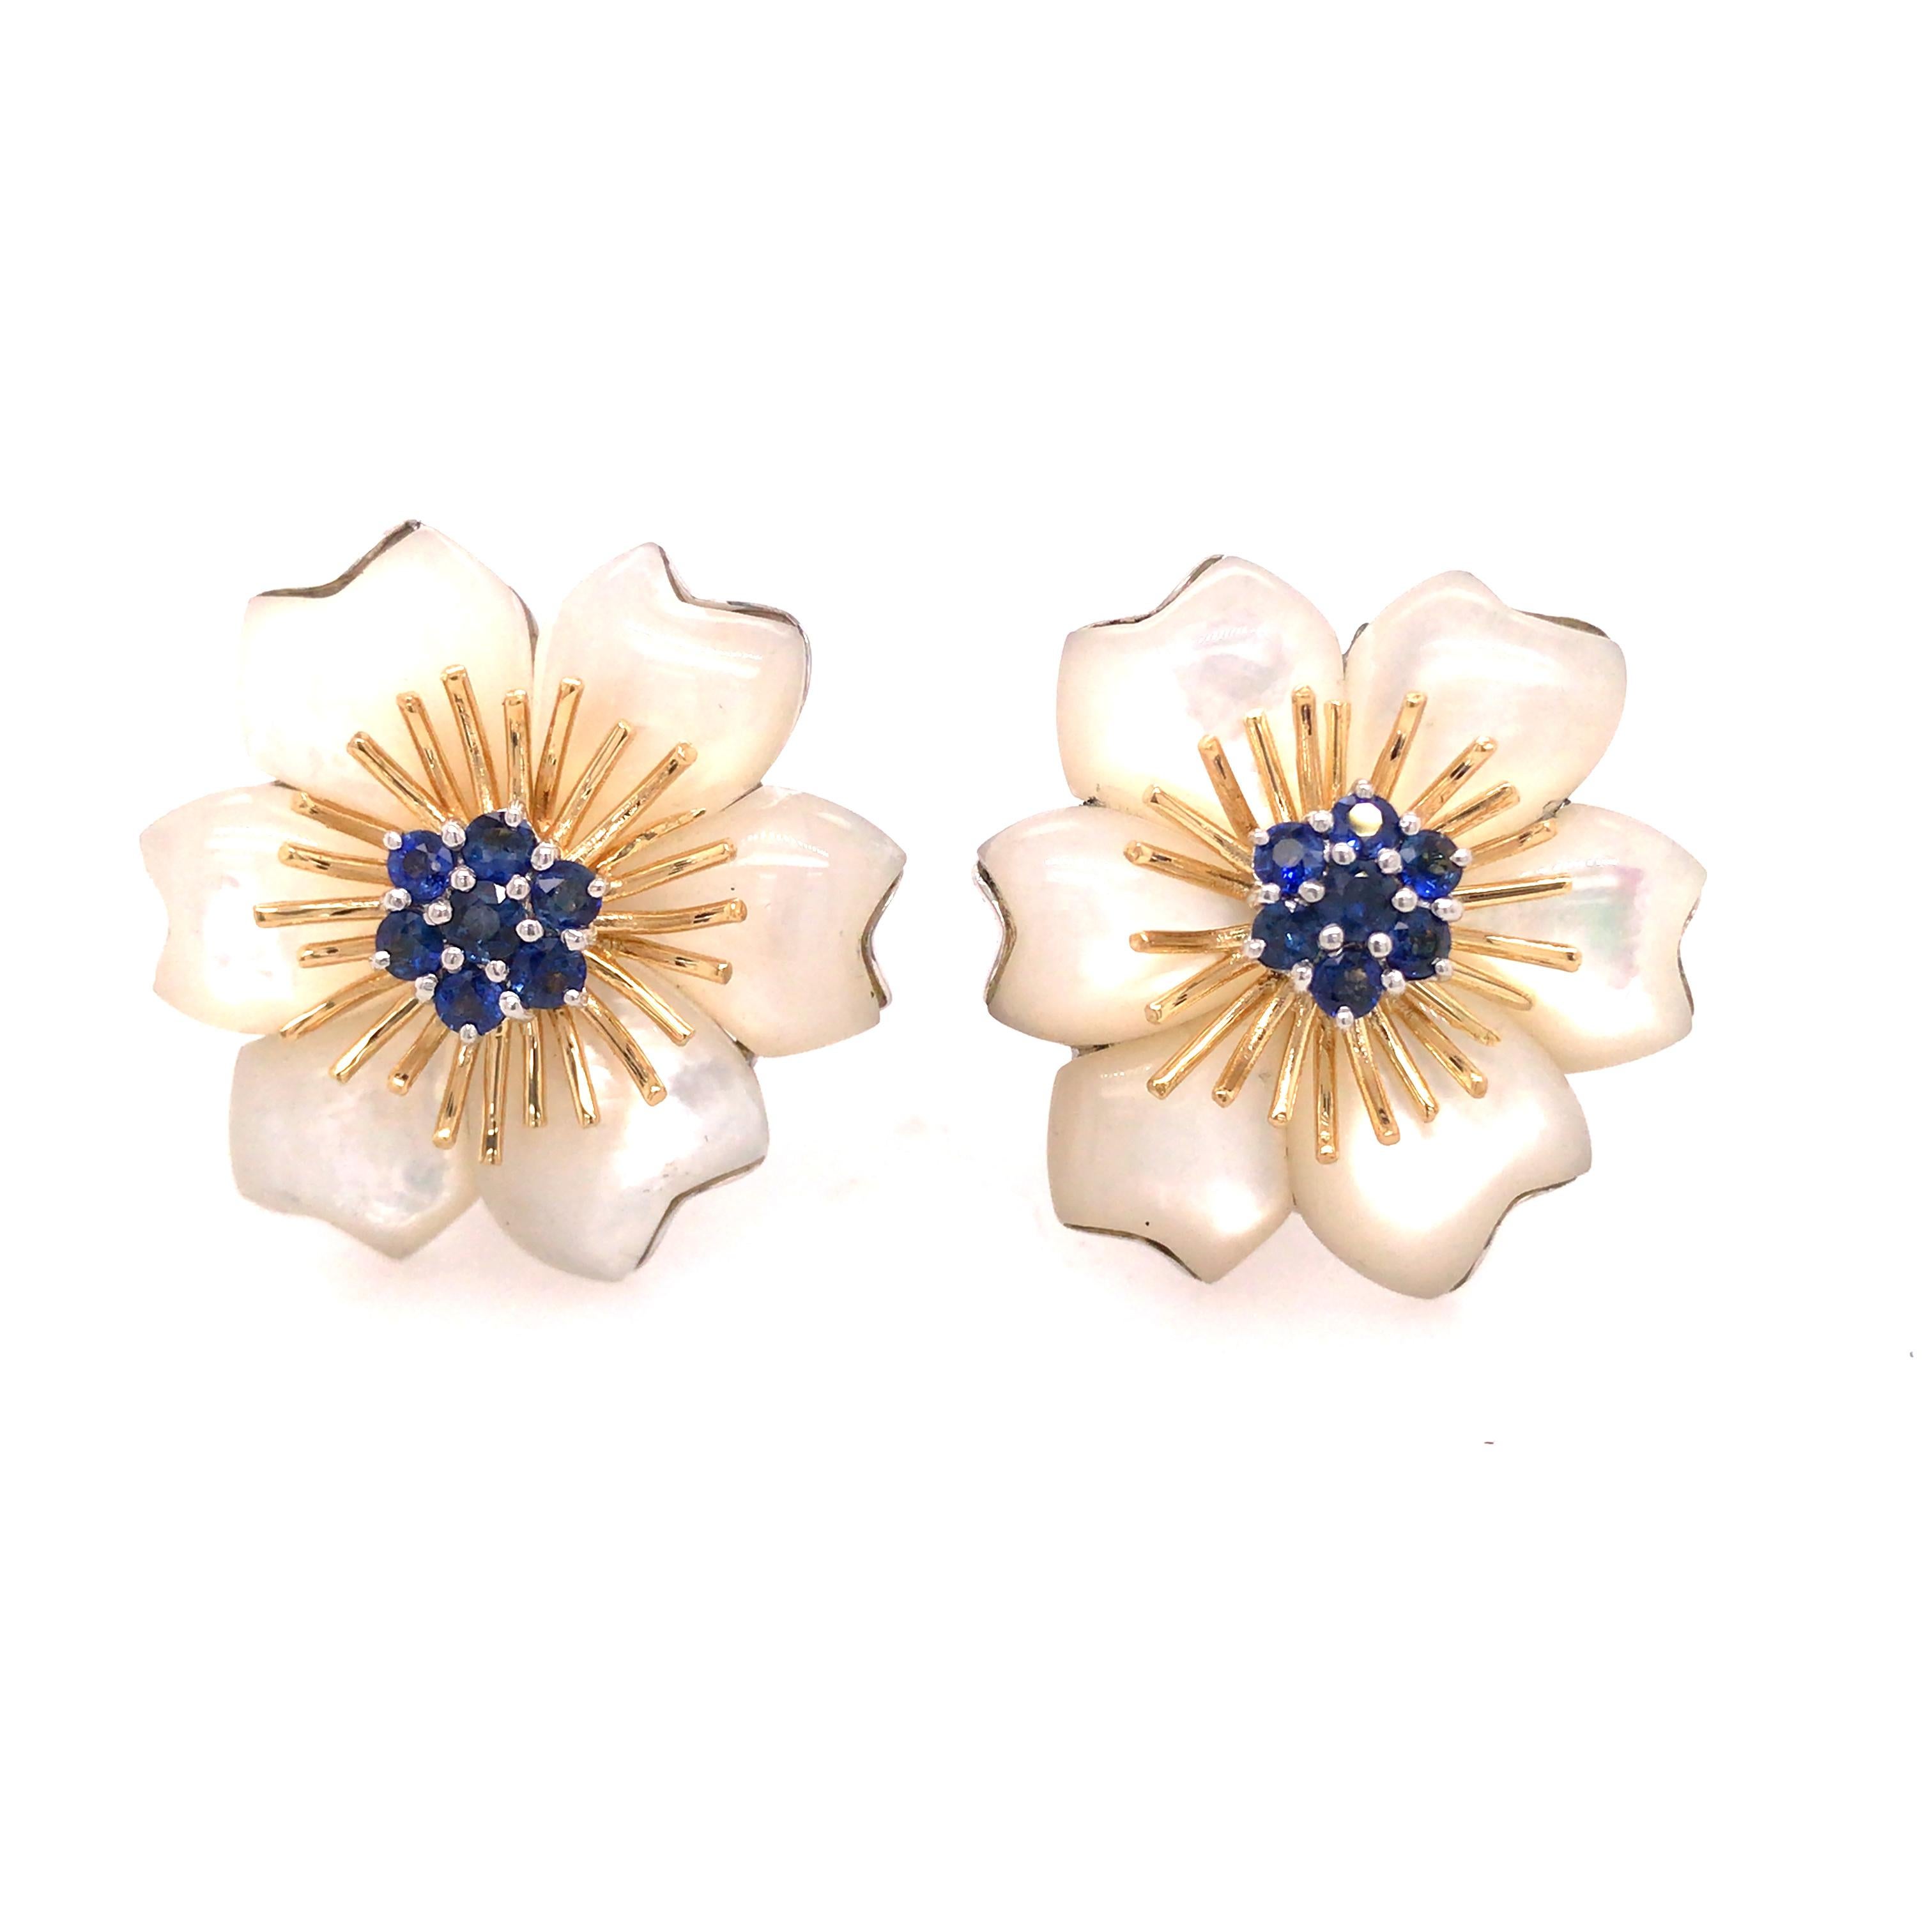 Kanaris Sapphire Flower Earrings in 18K Two-Tone Gold.  (12) White petals with Sapphires weighing 0.70 carat total weight set in clusters as the center of the flower.  18K Yellow Gold accents complete the flowers.  The Earrings measure 1 inch in